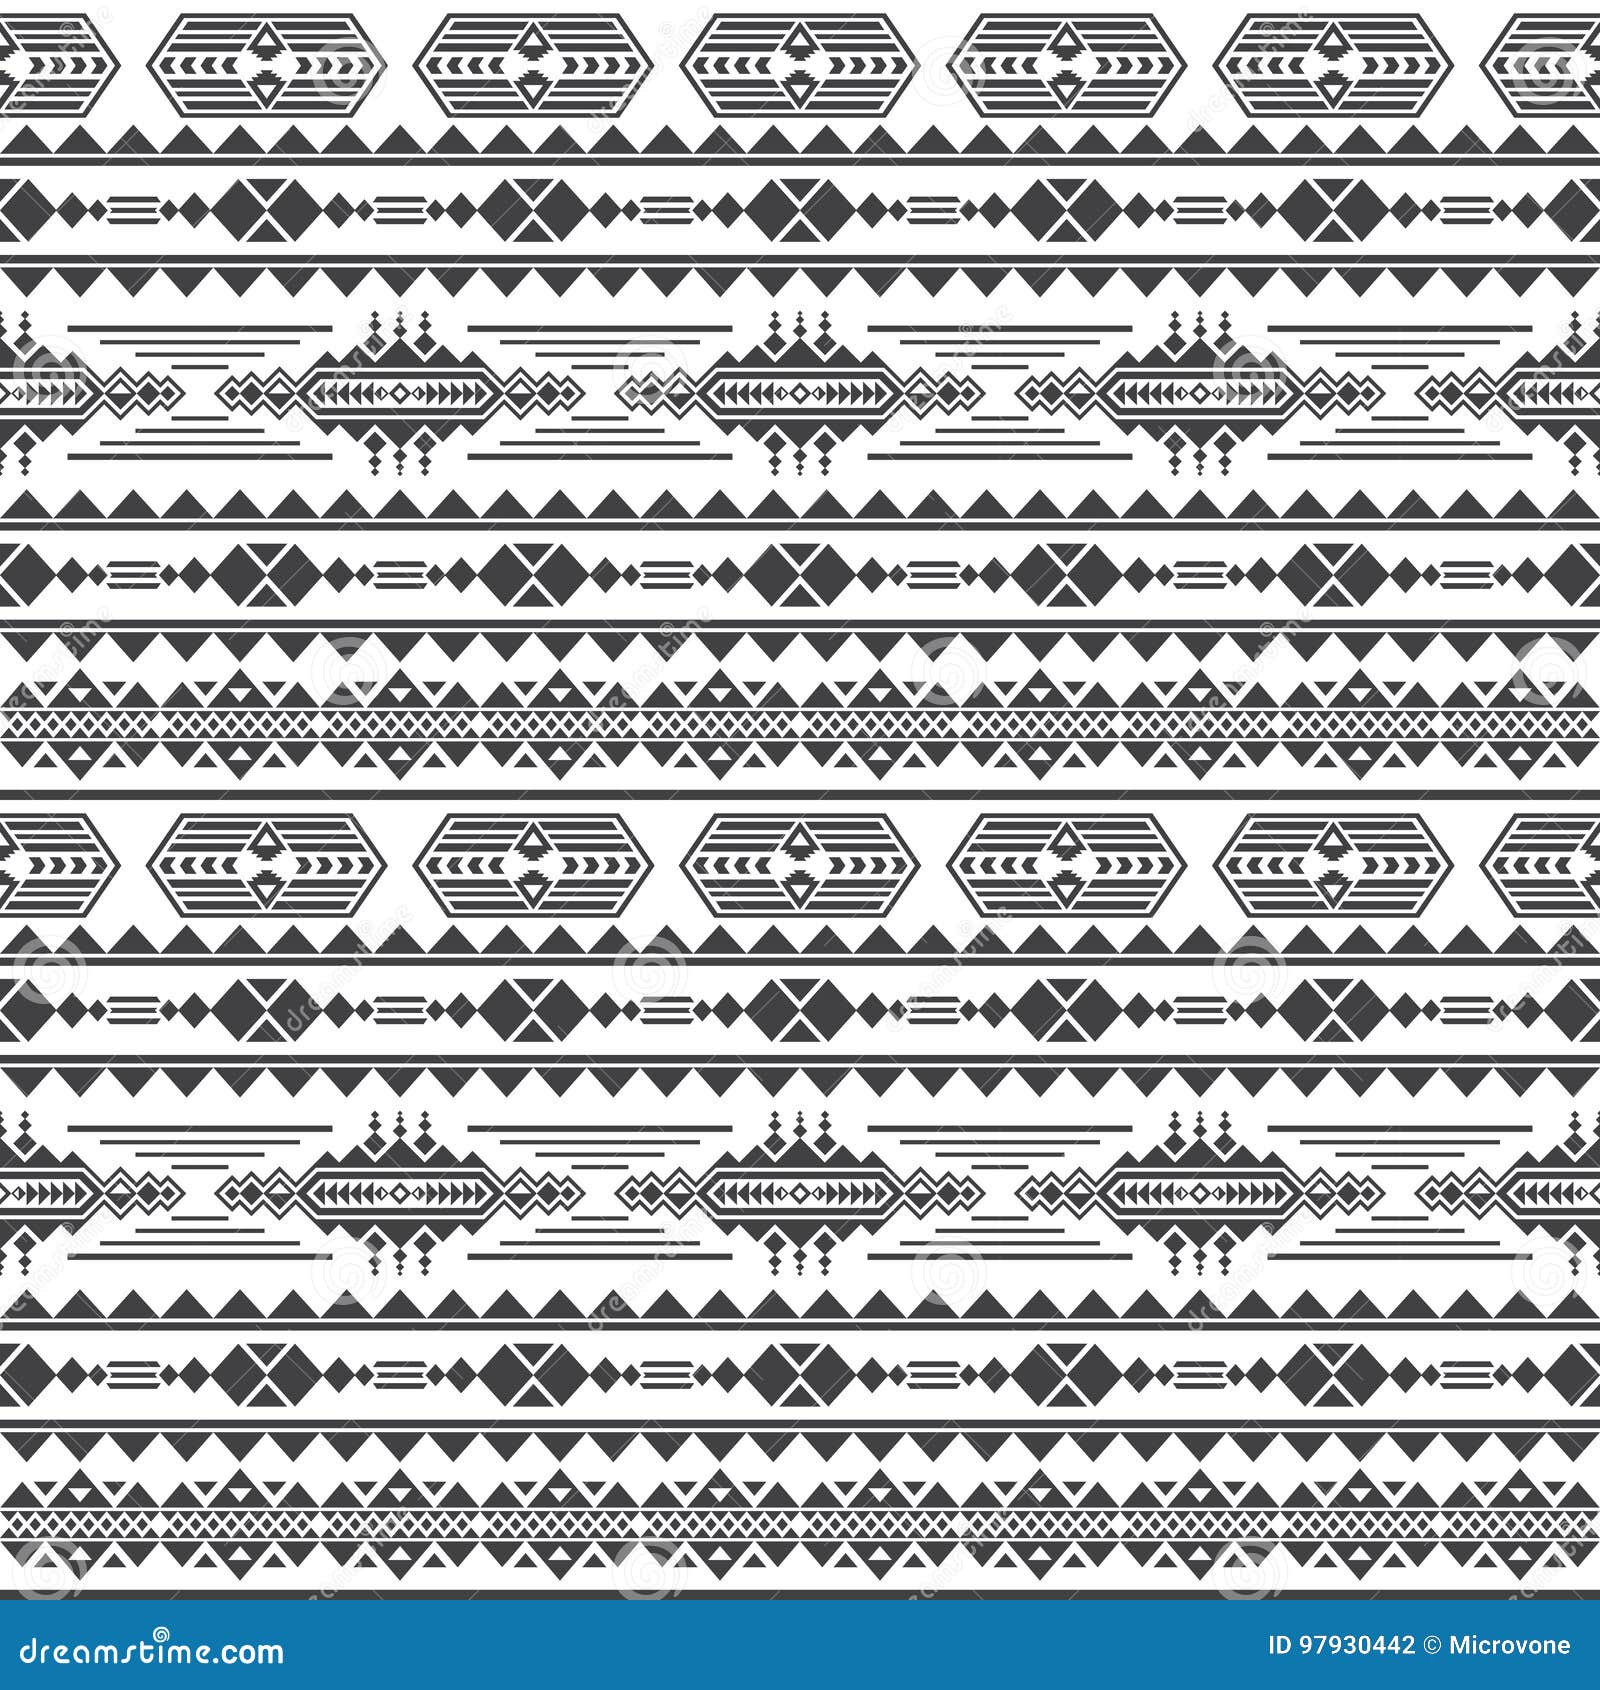 aztec culture  seamless pattern. mexican maya endless background